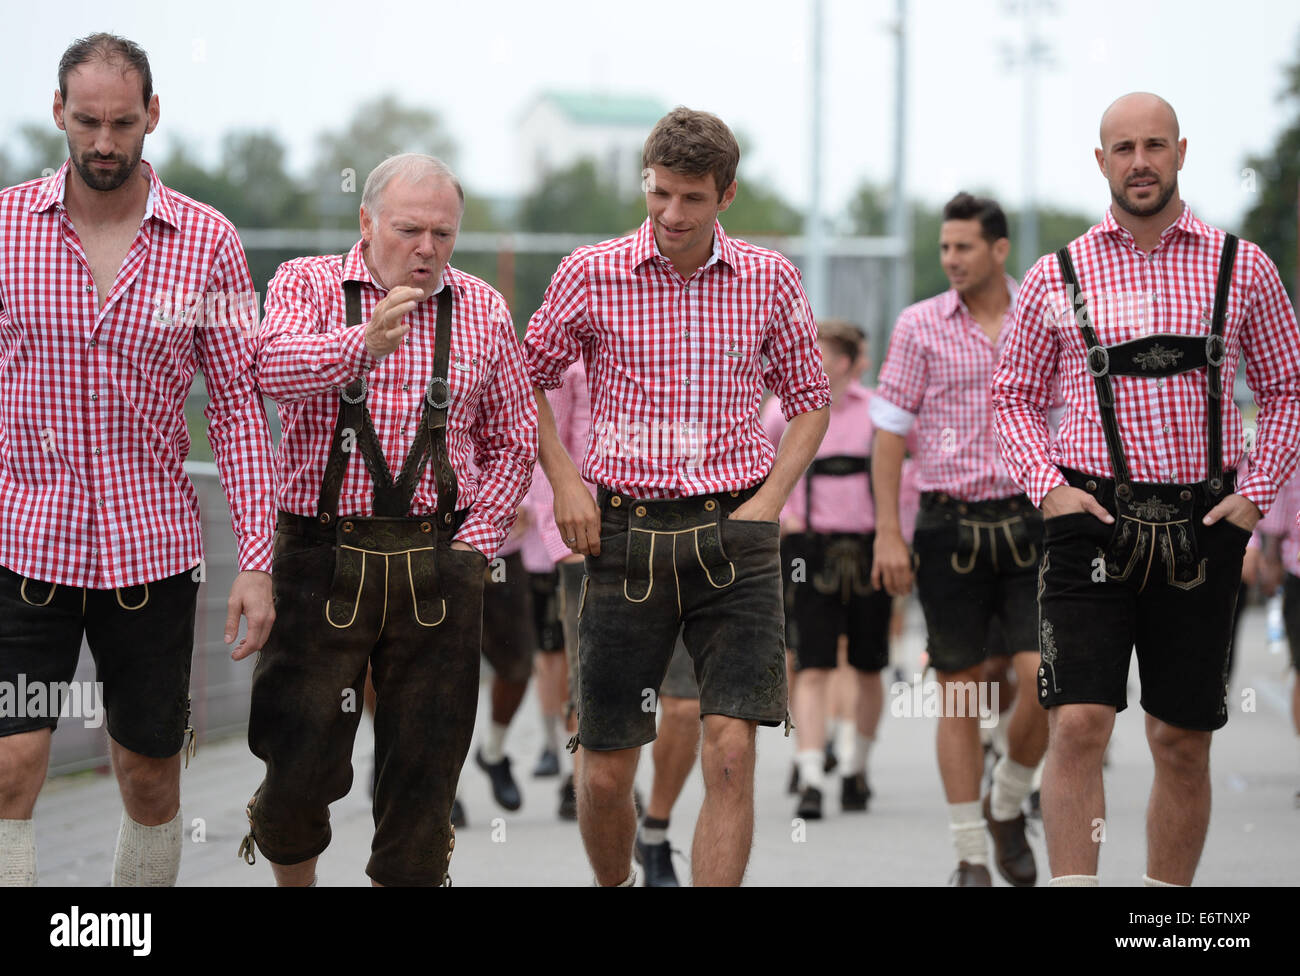 Munich, Germany. 31st Aug, 2014. Goalkeeper Tom Starke (L-R), assistant coach Hermann Gerland, Thomas Mueller, Claudio Pizarro and goalkeeper Pepe Reina of German Bundesliga soccer club FC Bayern Munich are dressed in Bavarian traditional costumes as they arrive for a photo shoot organized by a sponsor in Munich, Germany, 31 August 2014. Photo: ANDREAS GEBERT/dpa/Alamy Live News Stock Photo